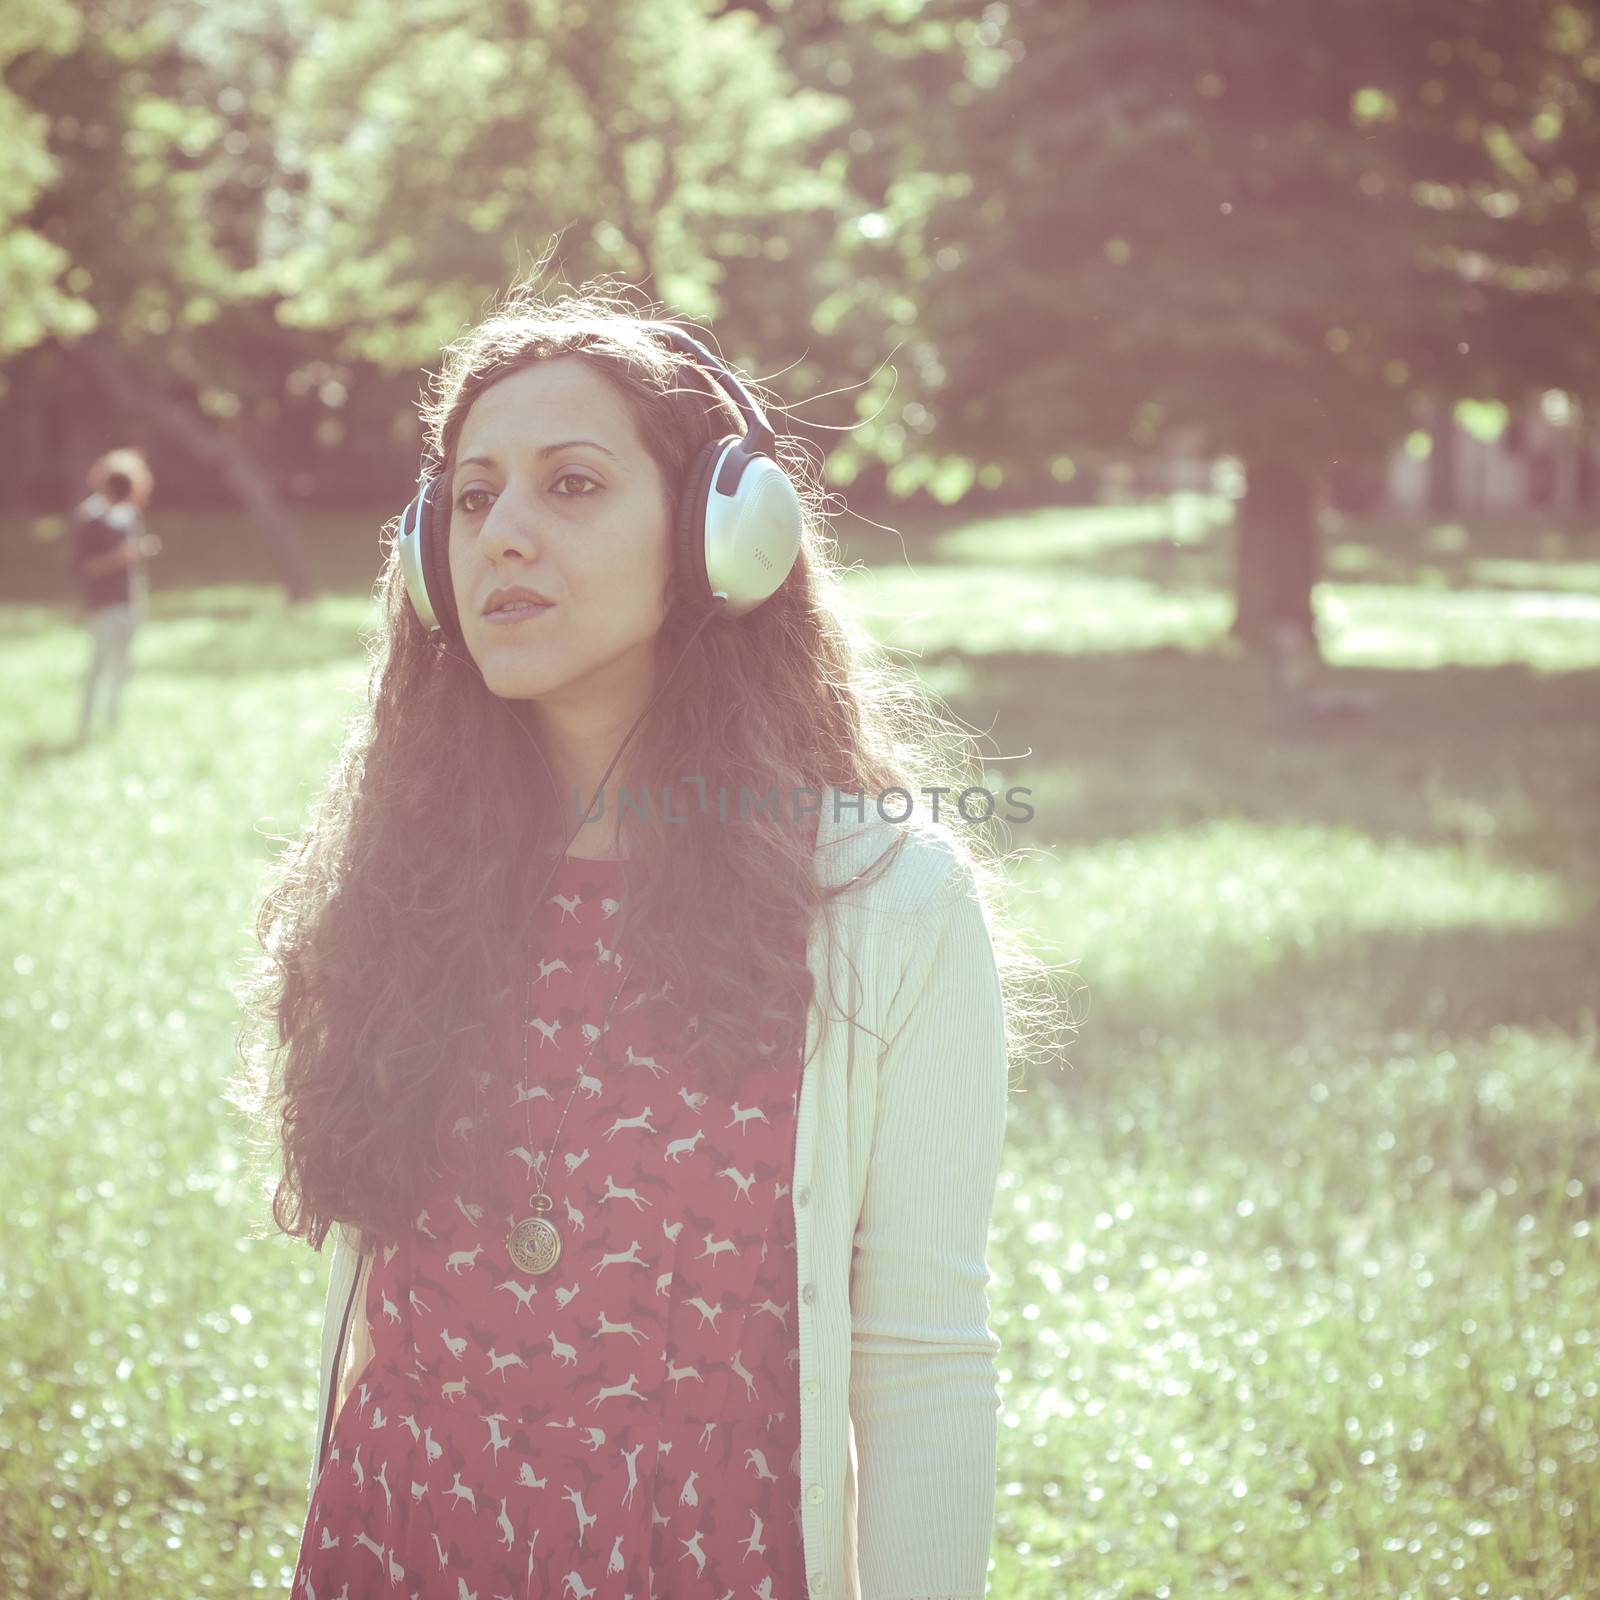 vintage hipster eastern woman with headphones in the park